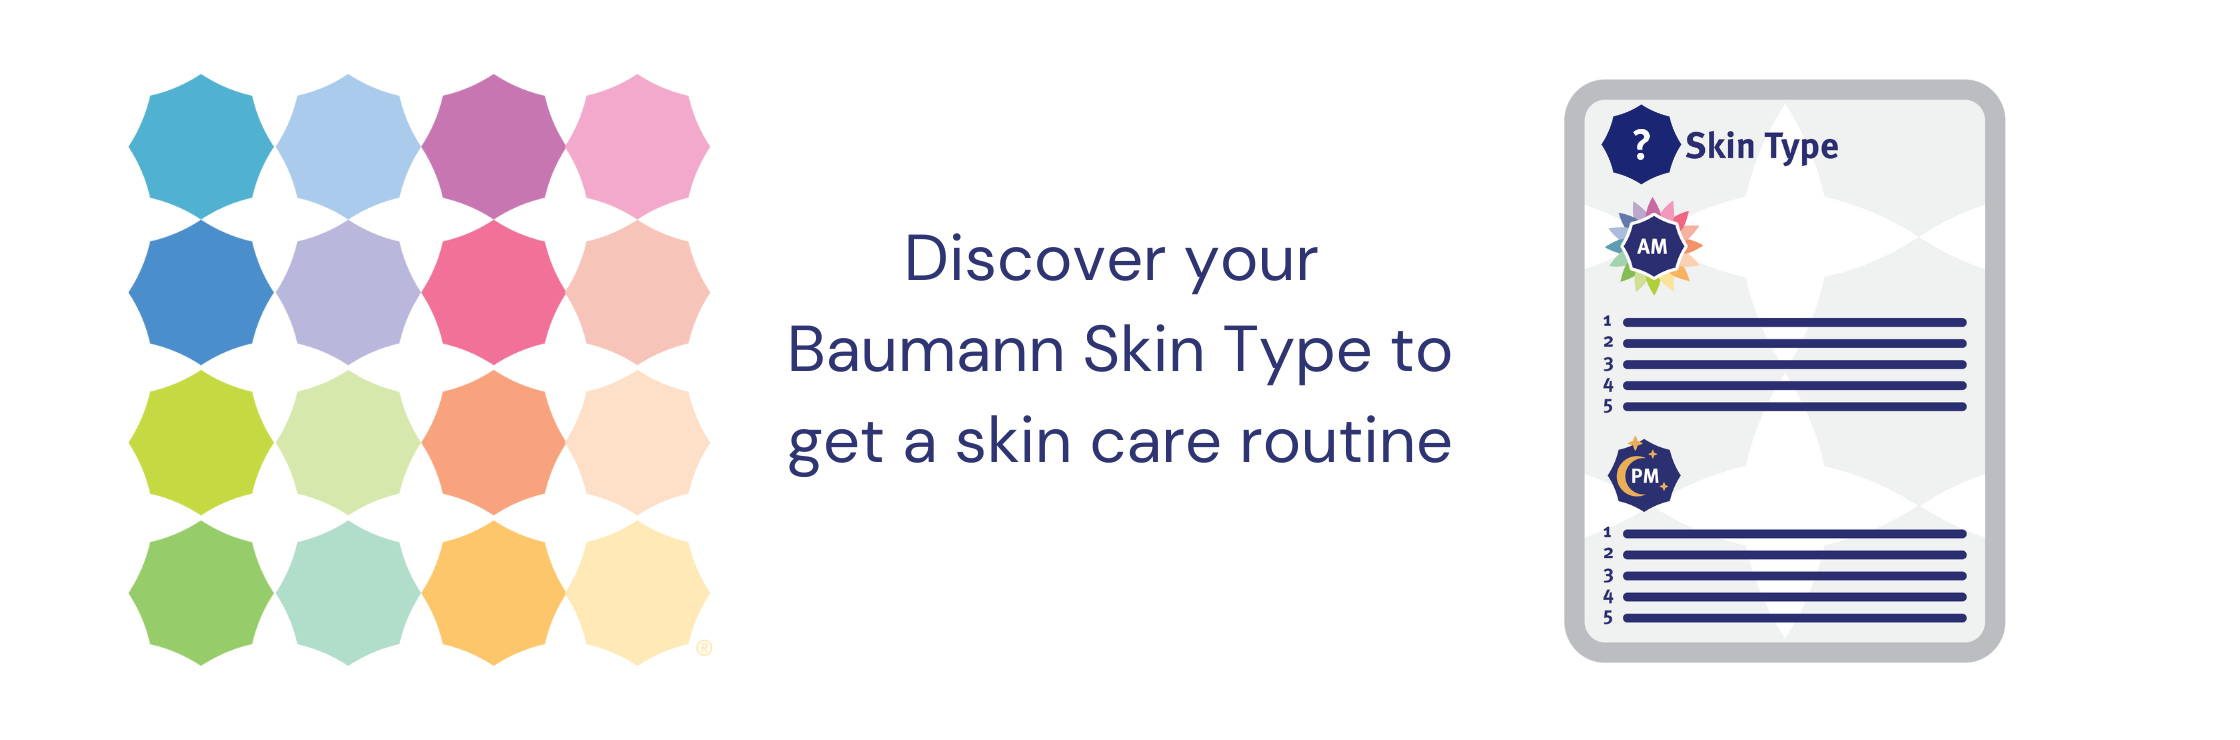 Dr. B discover skin type